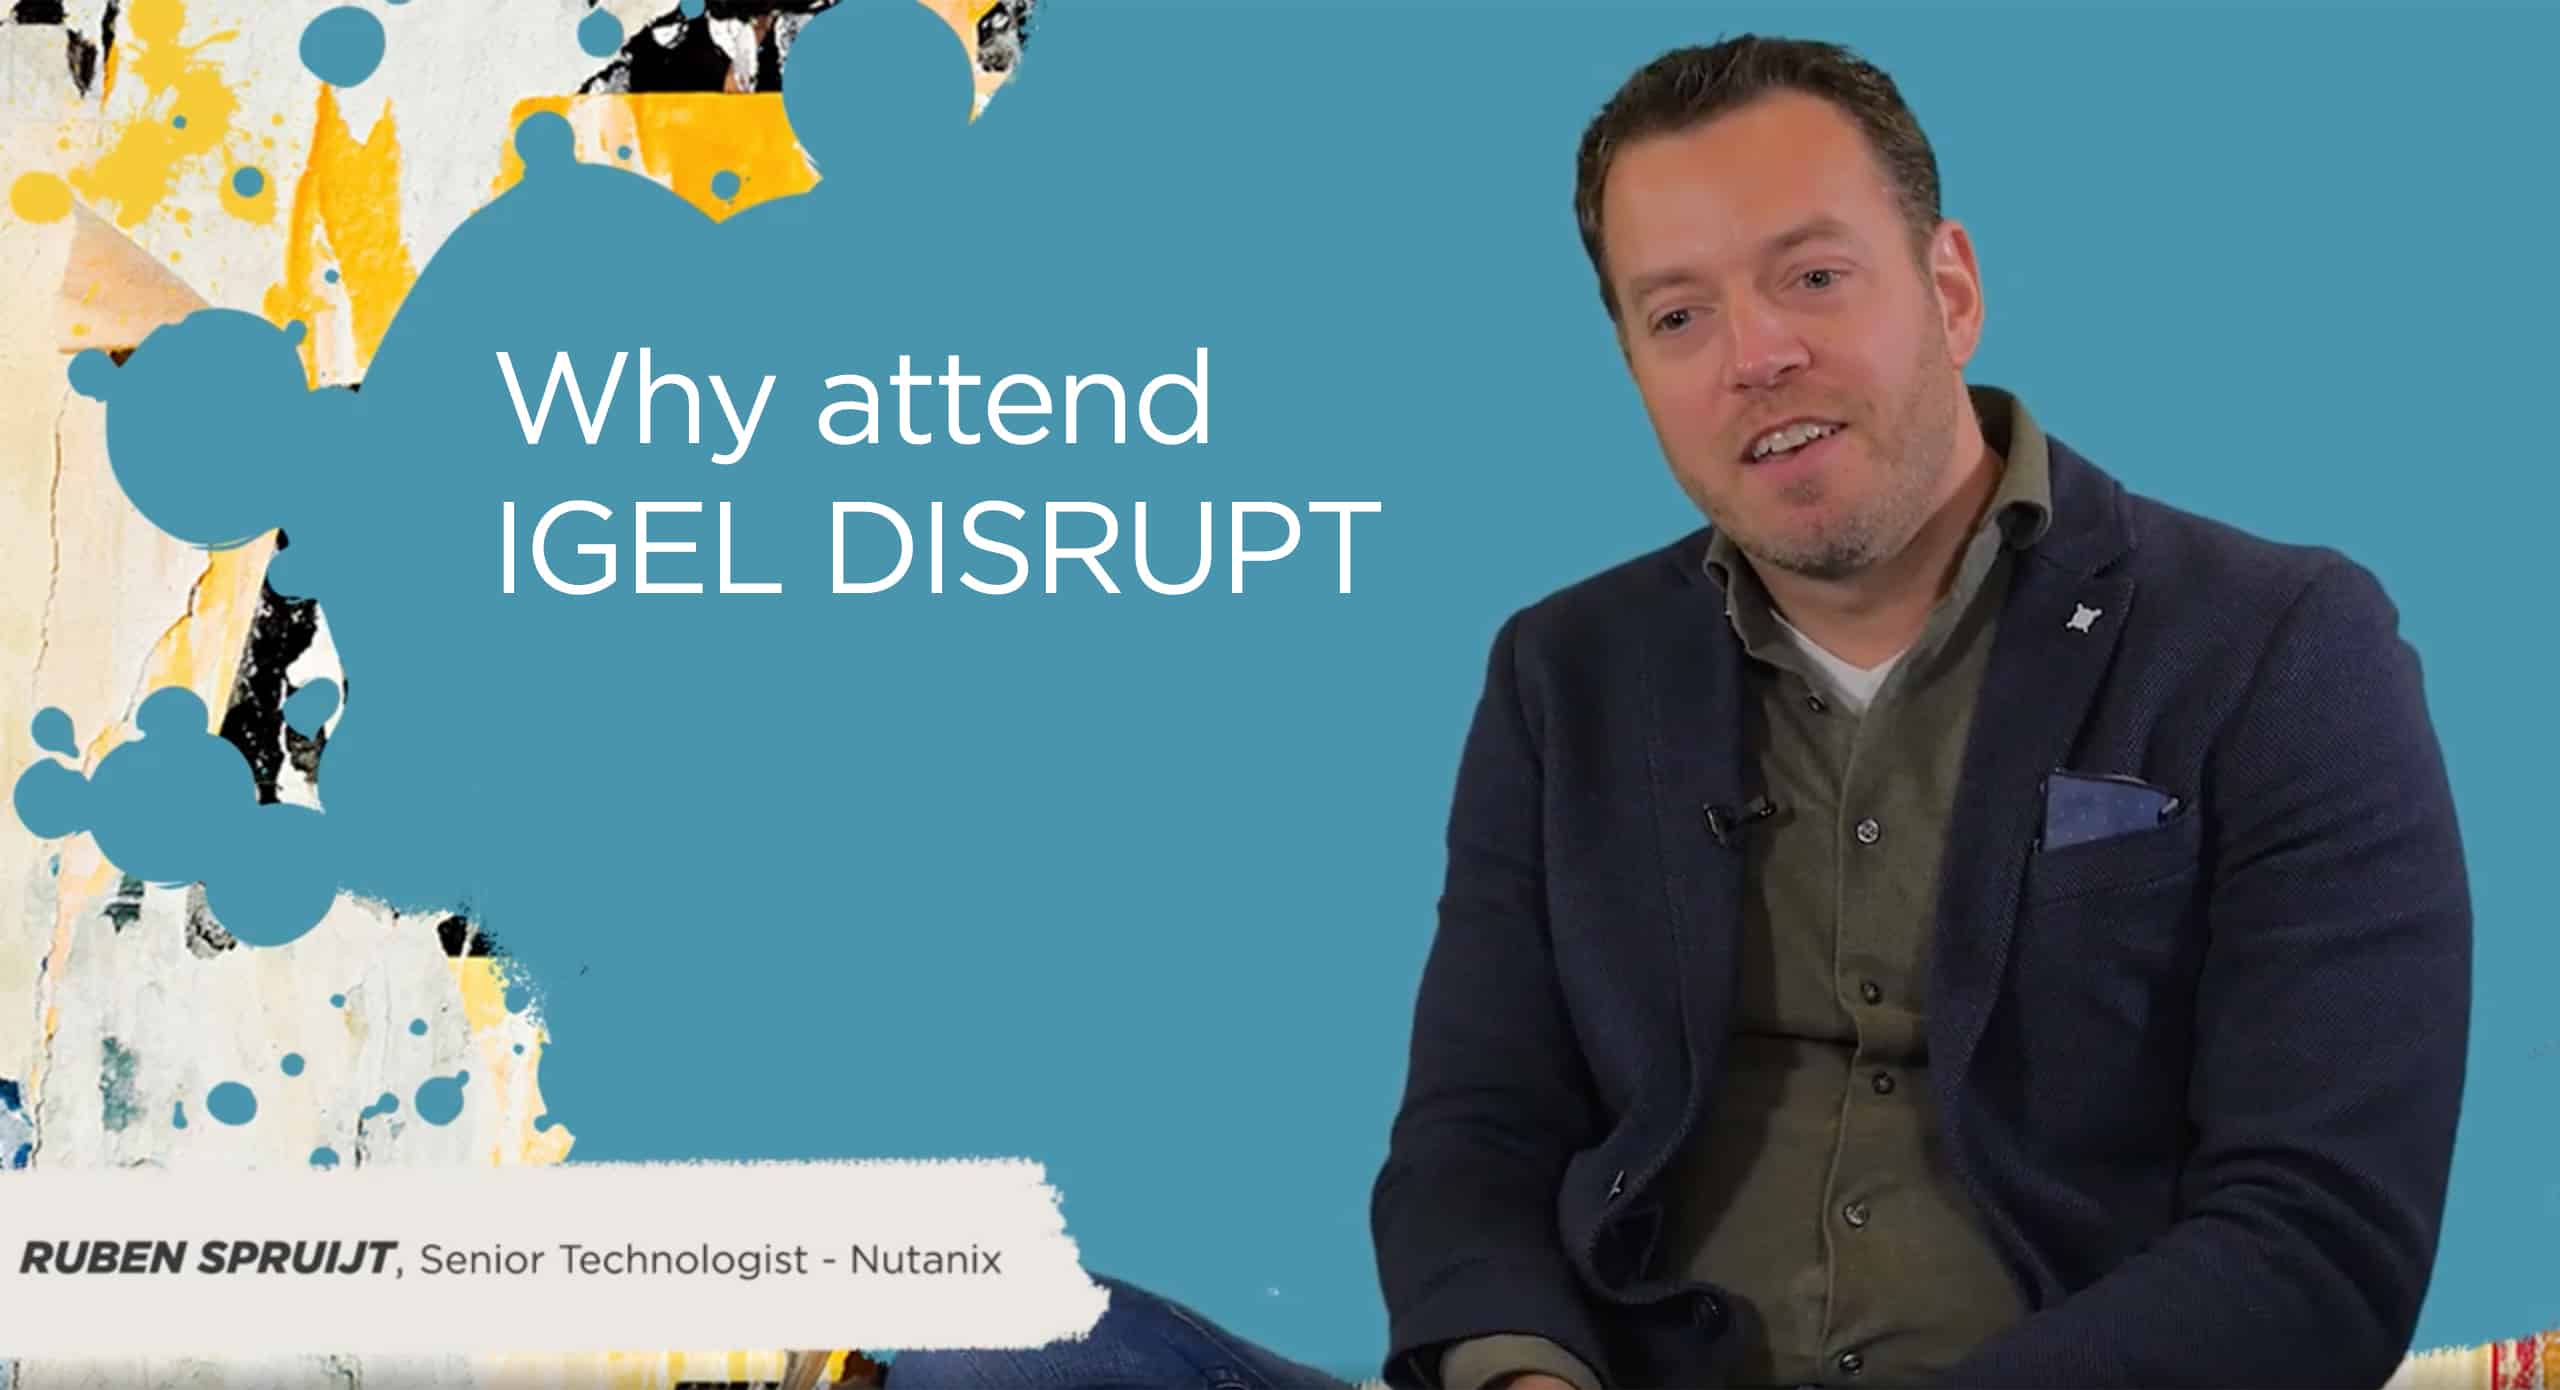 Why attend IGEL DISRUPT